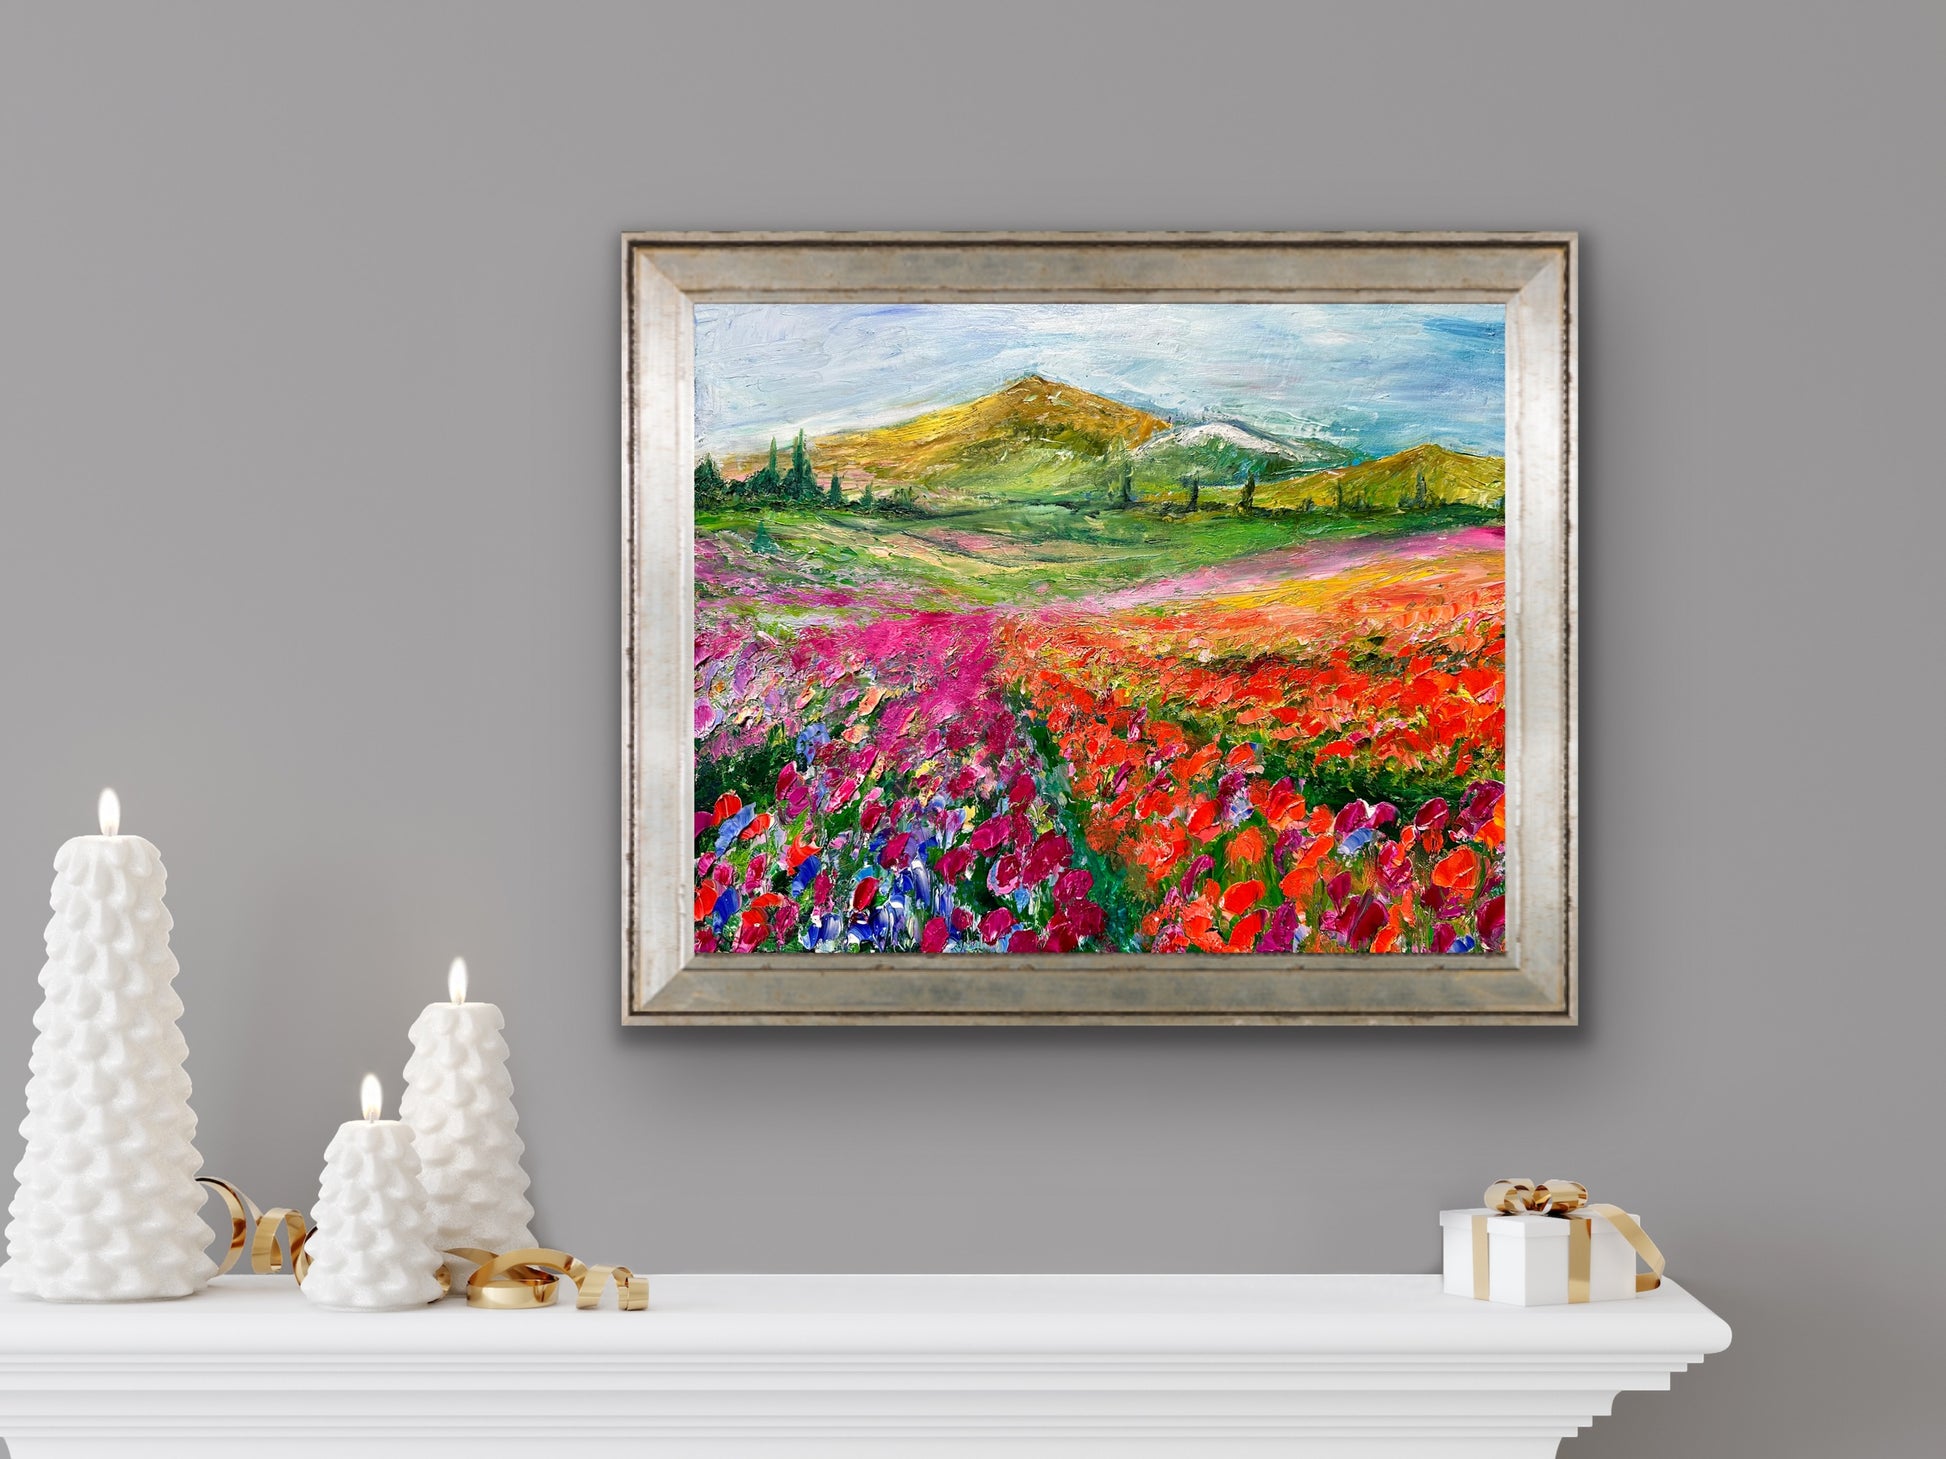 abstract impressionist oil painting of rows of orange and purple flowers with mountain hanging in room with white shelf